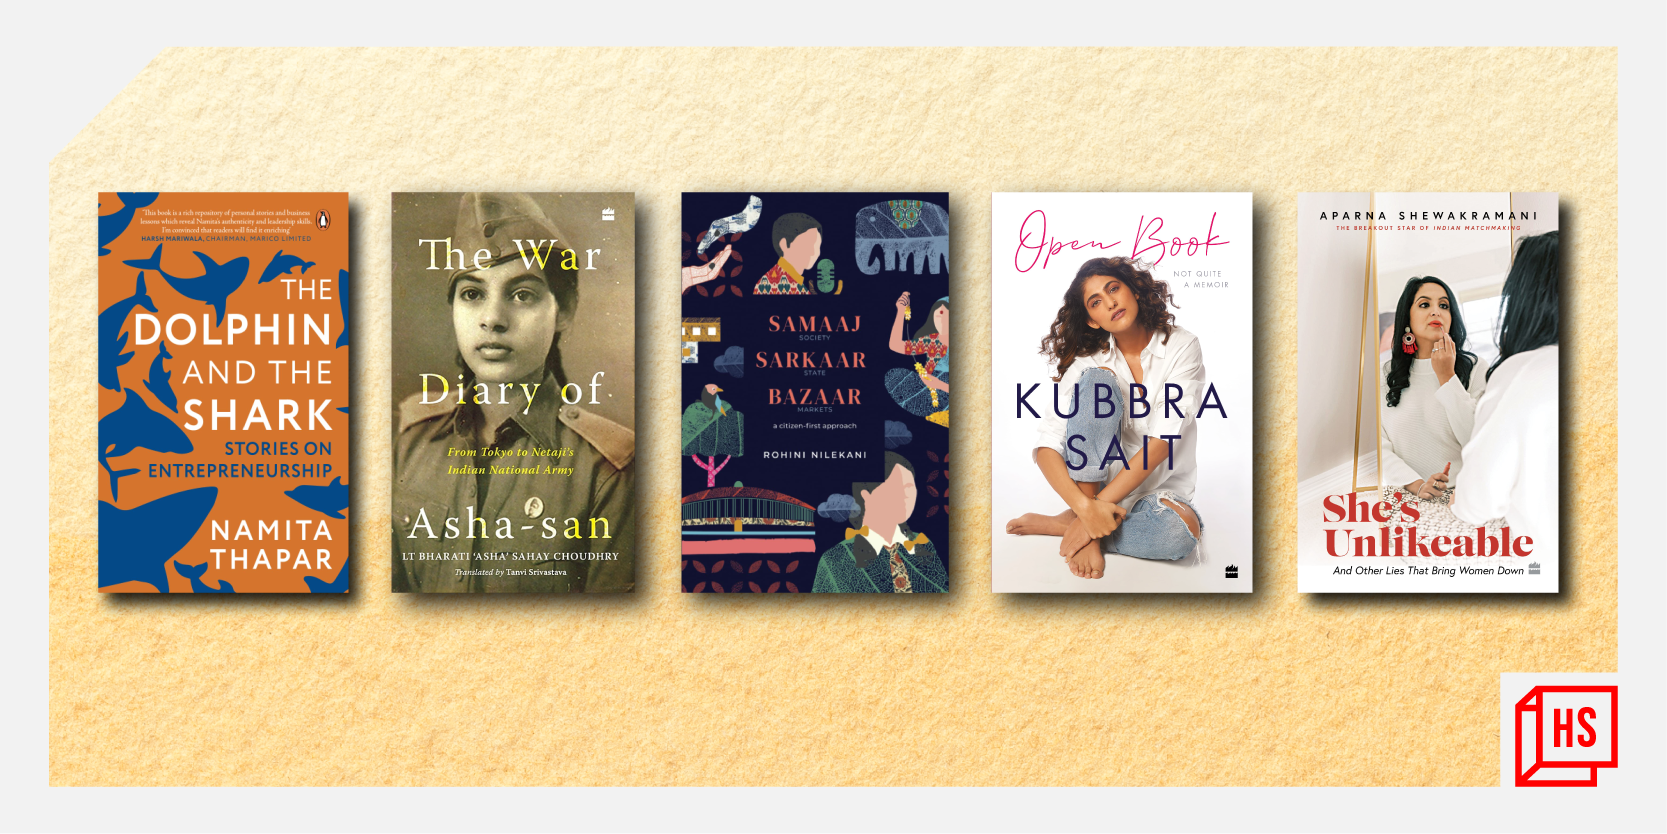 One for the books: Top women authors we read this year

